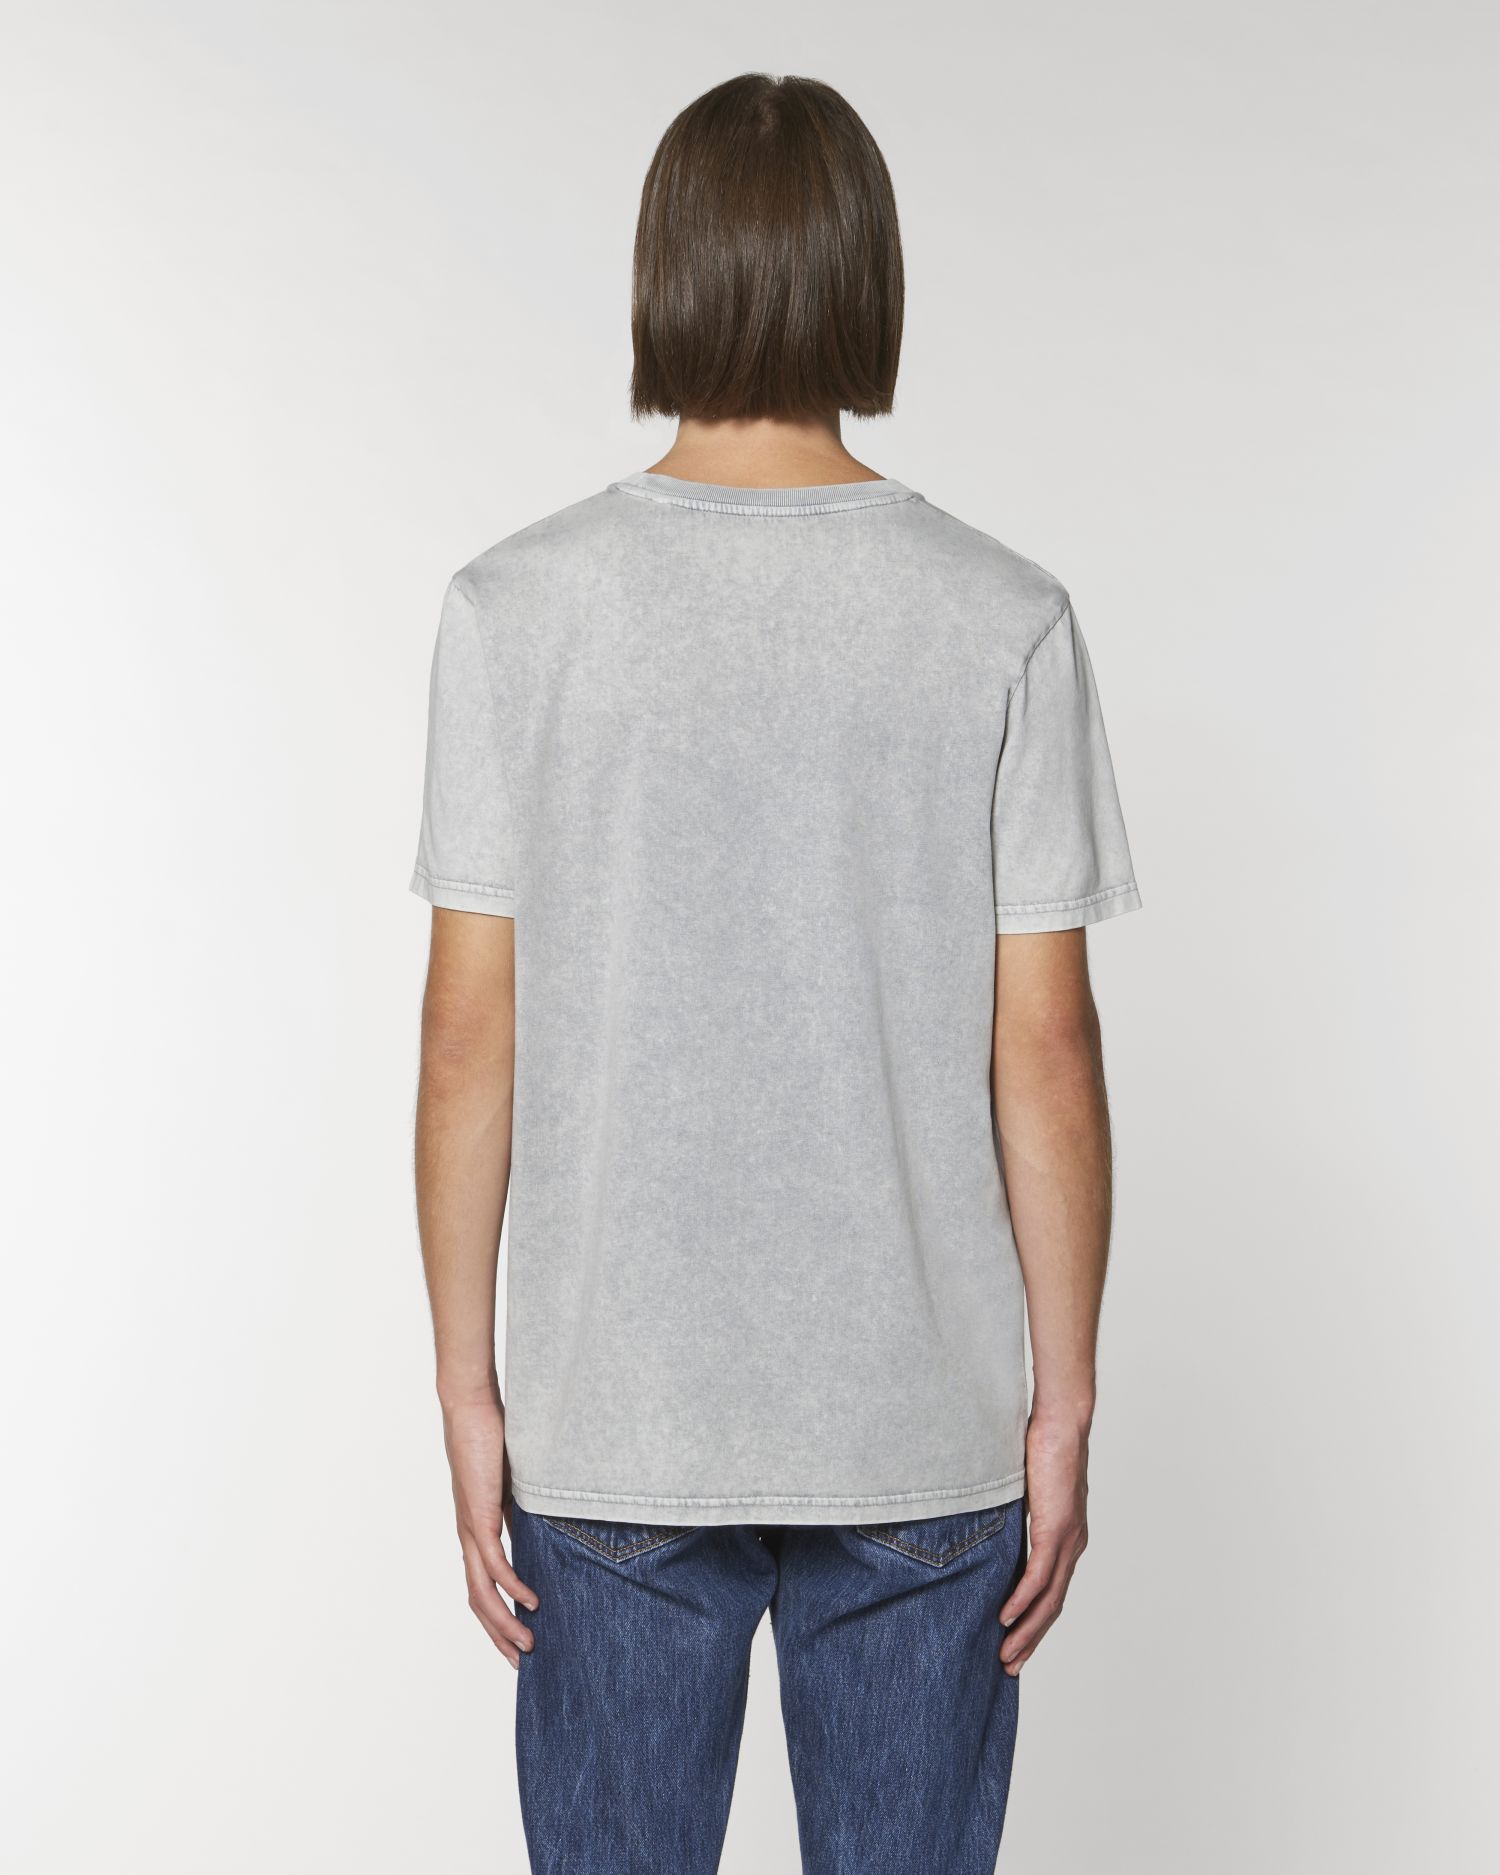 T-Shirt Creator Vintage in Farbe G. Dyed Aged Light Grey